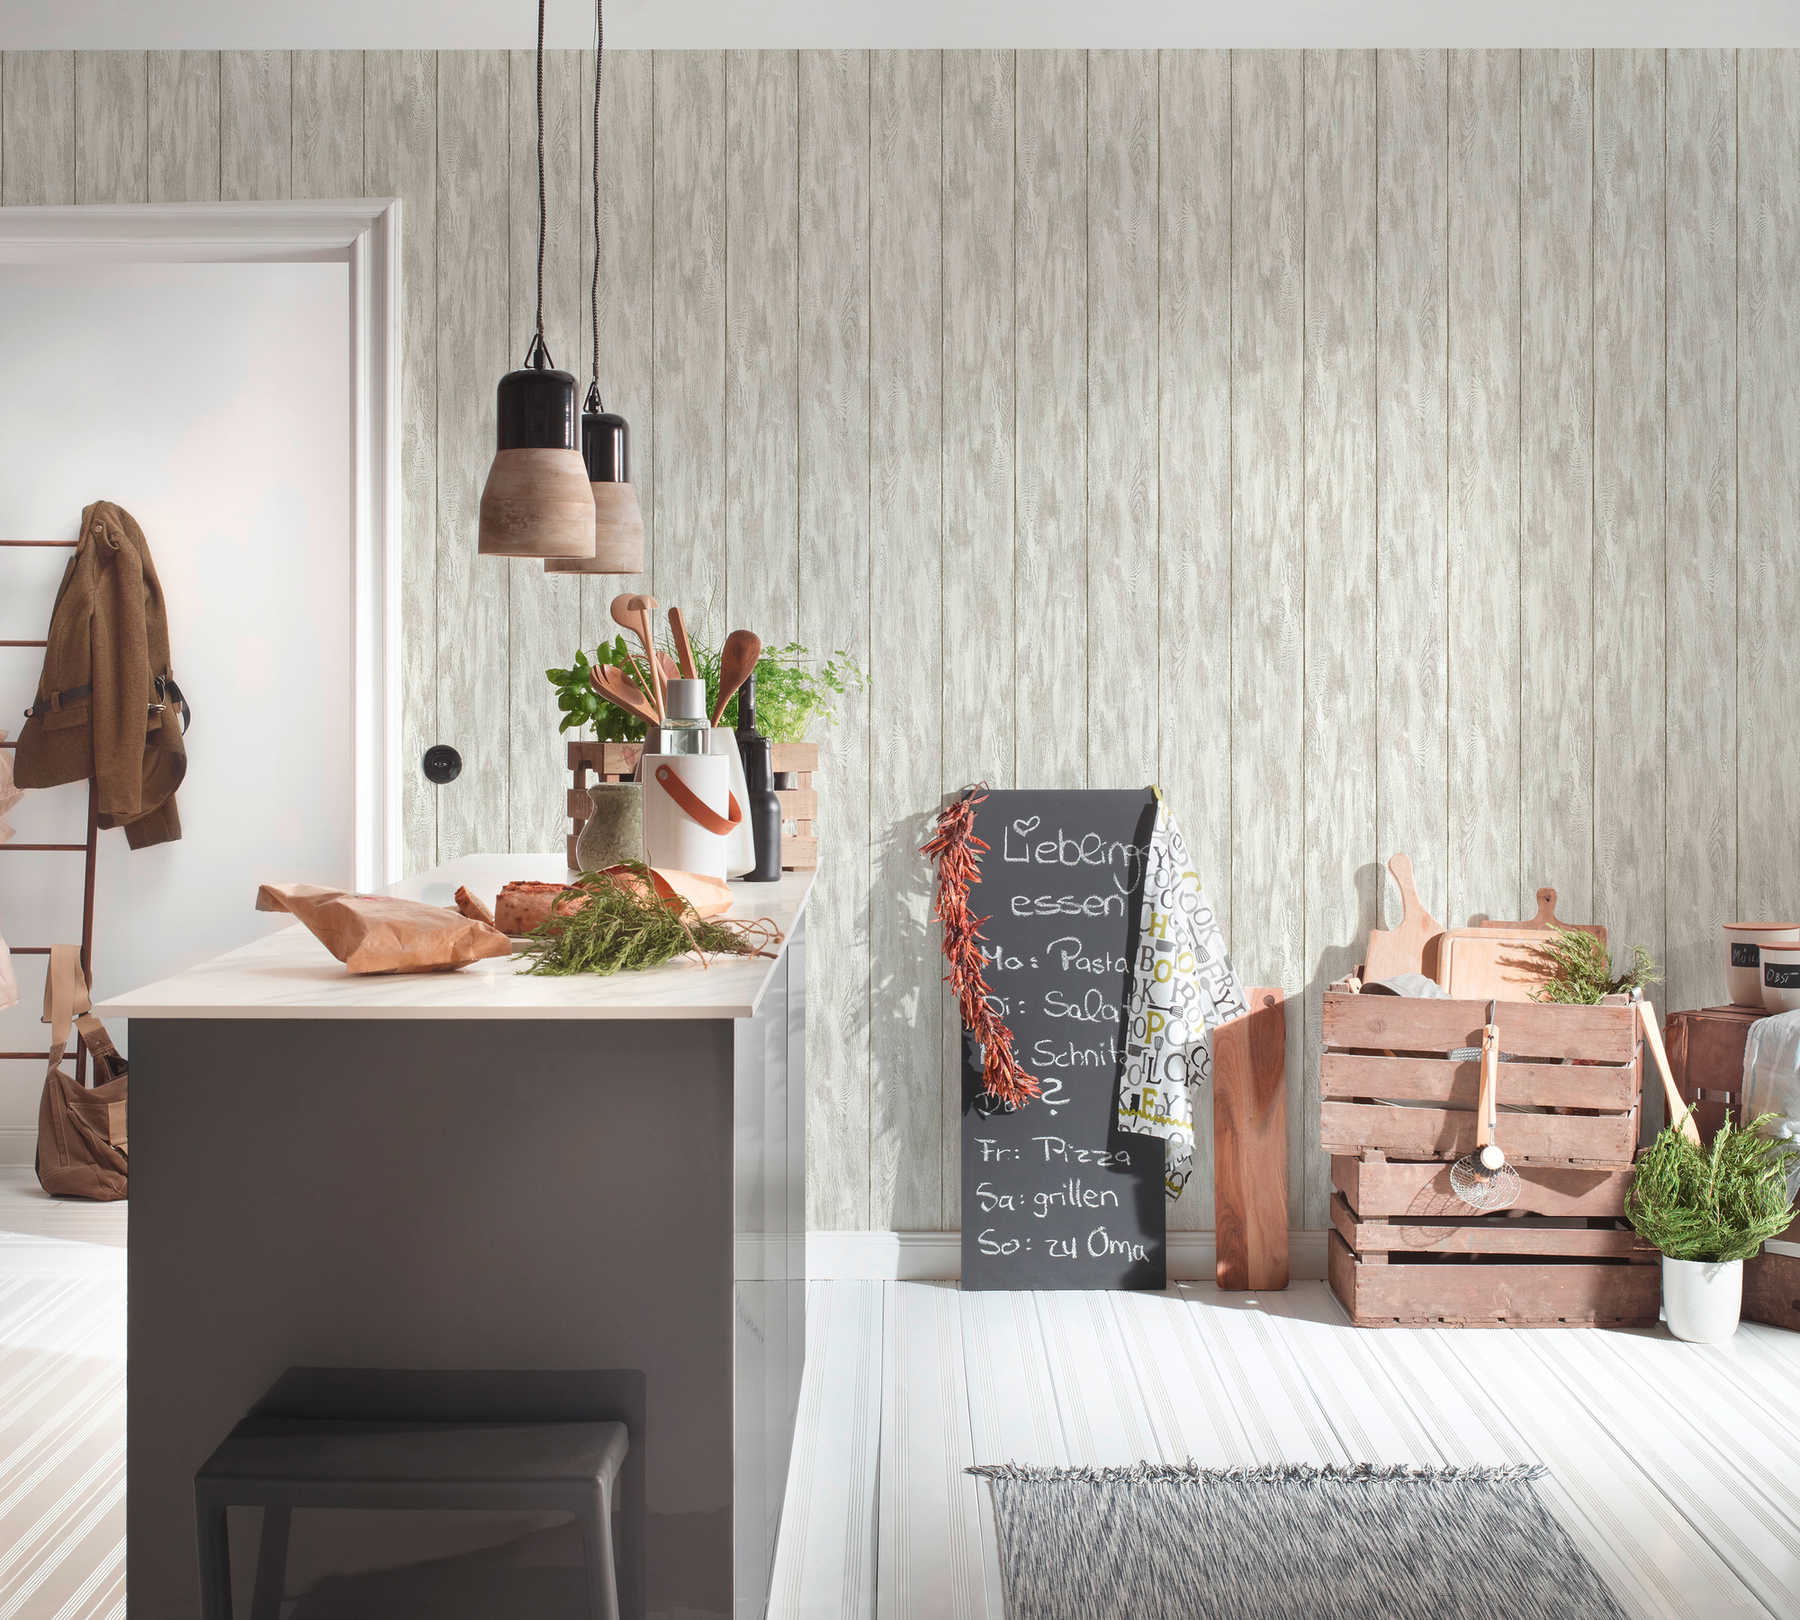             Wallpaper wood look for a cozy country house feeling - beige, cream, grey
        